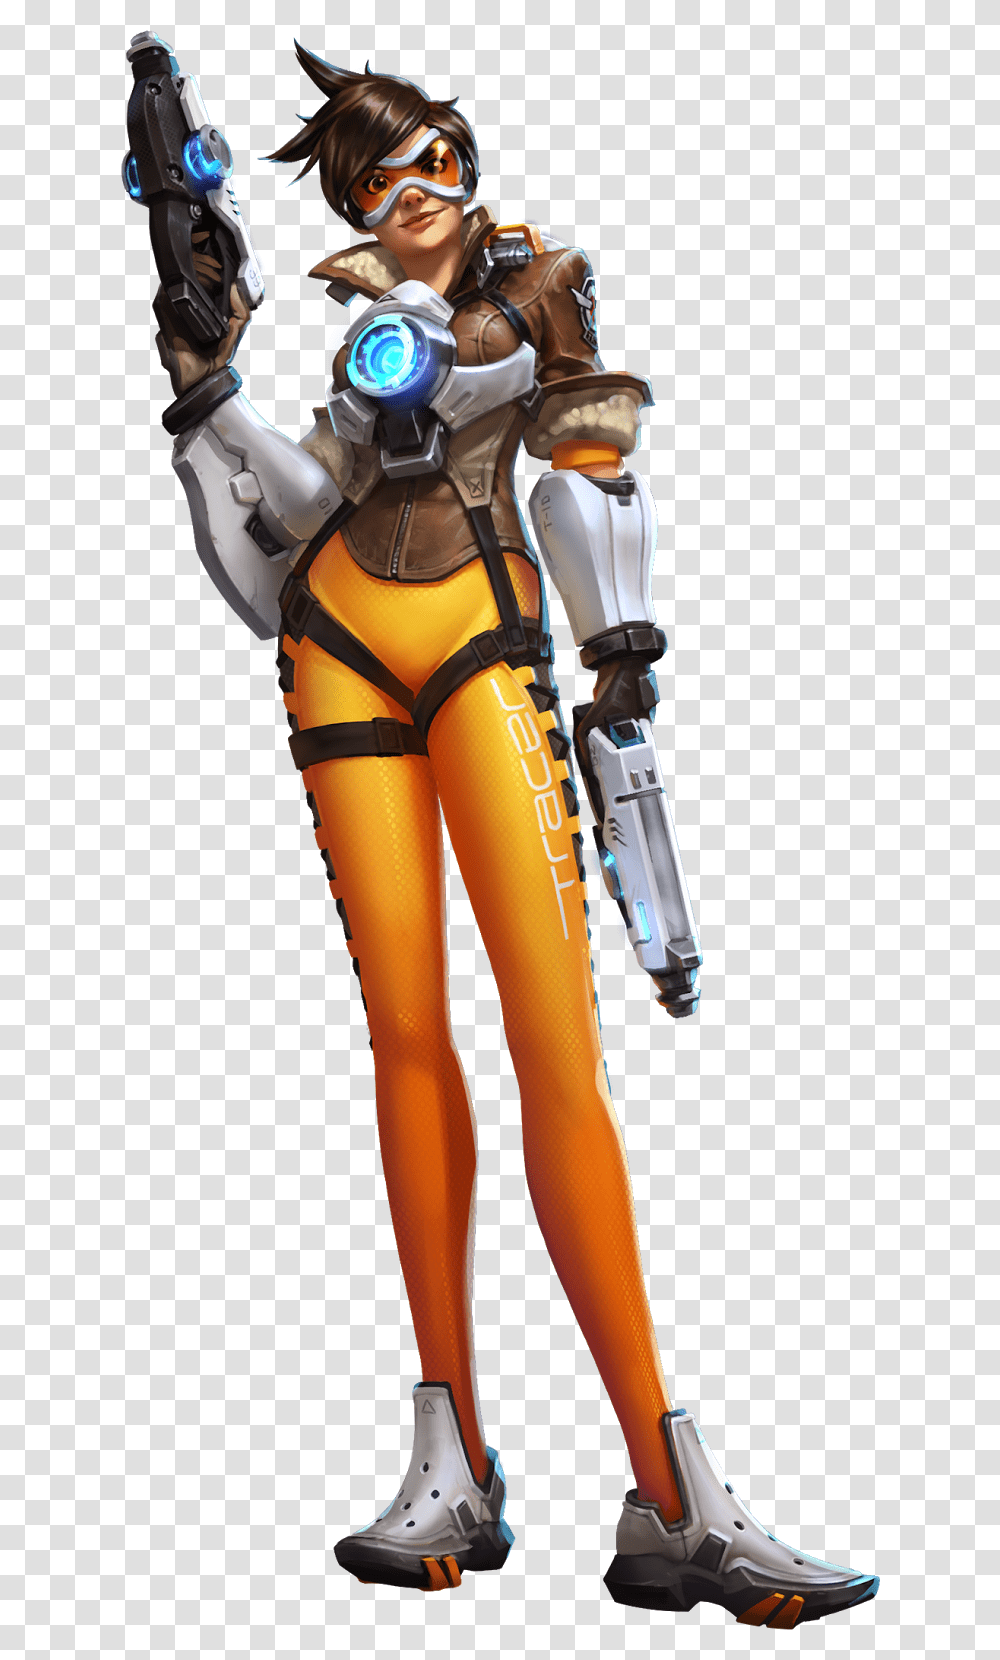 Heroes Of The Storm Tracer, Apparel, Sunglasses, Accessories Transparent Png